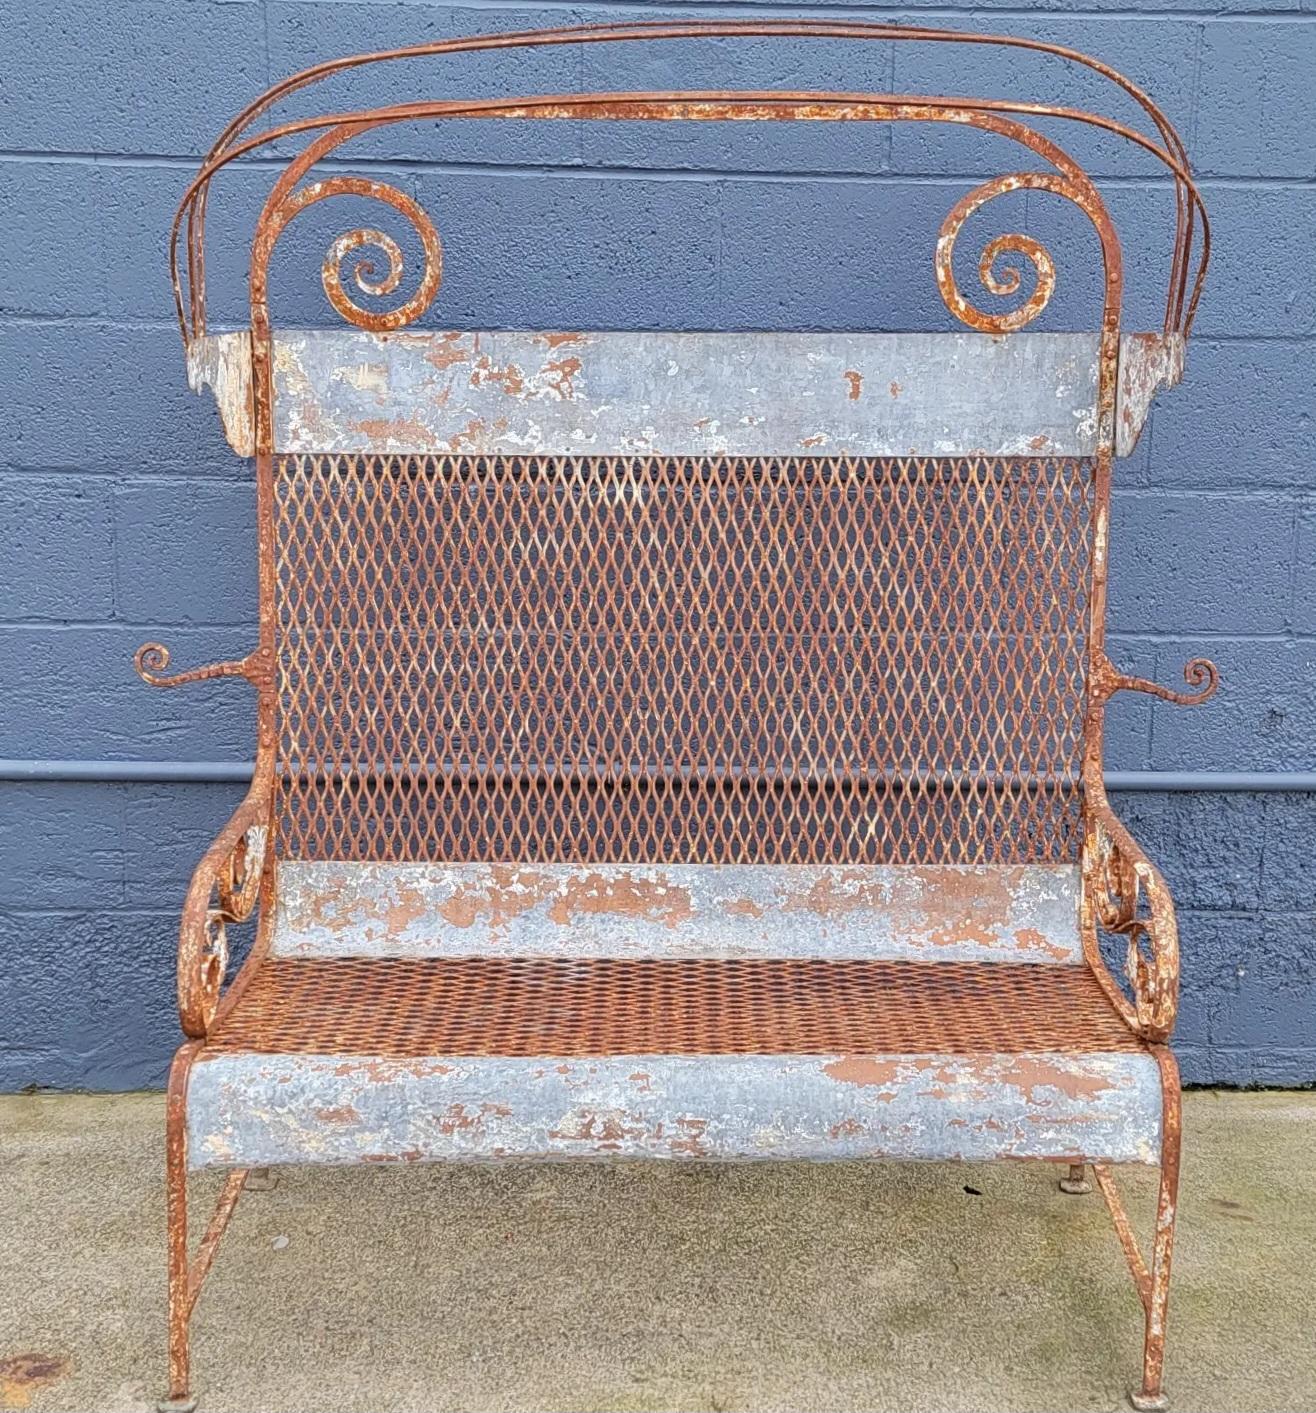 Unusual iron patio bench with retracting canopy. Hand made of mixed metals, cast and wrought iron, steel and galvanized steel. Beautiful patina from outdoor use. Structurally very solid. Retracting canopy utilizes 3 folding iron bars, fabric absent.